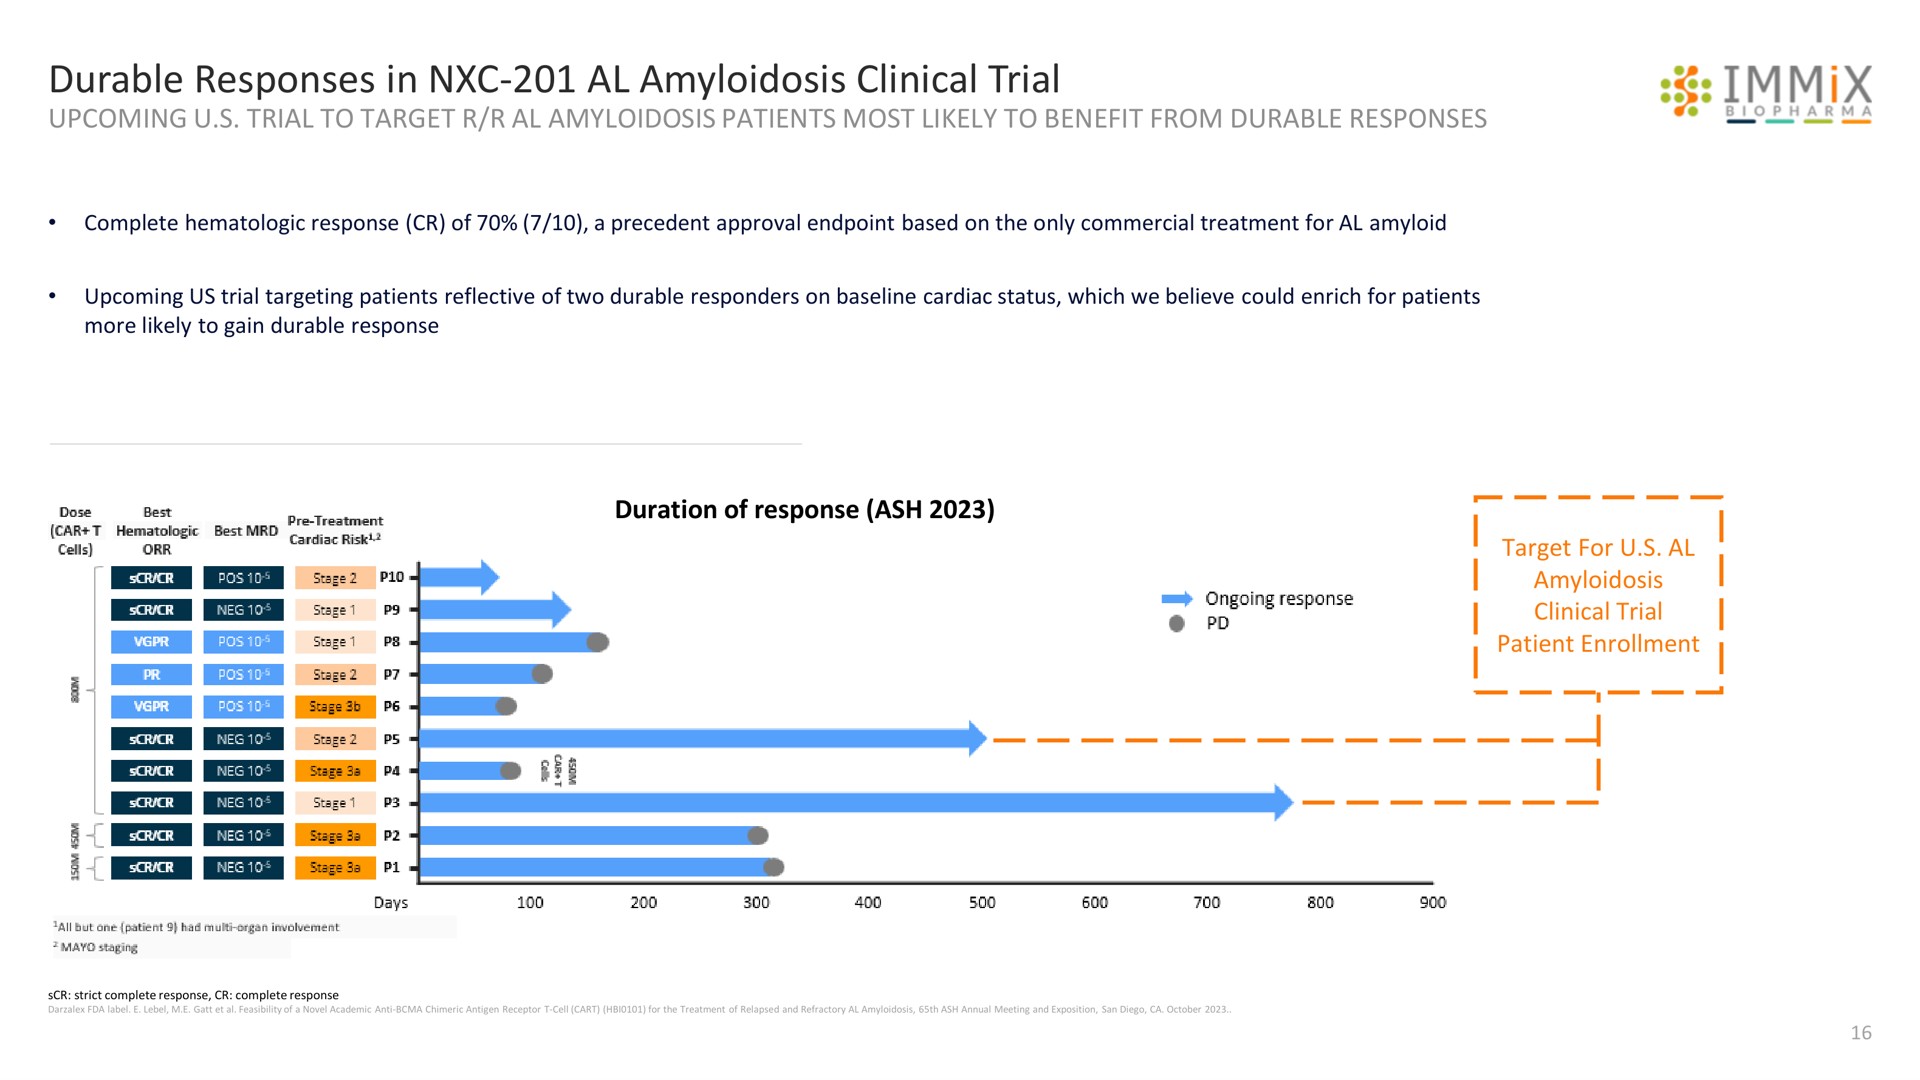 durable responses in amyloidosis clinical trial i a | Immix Biopharma